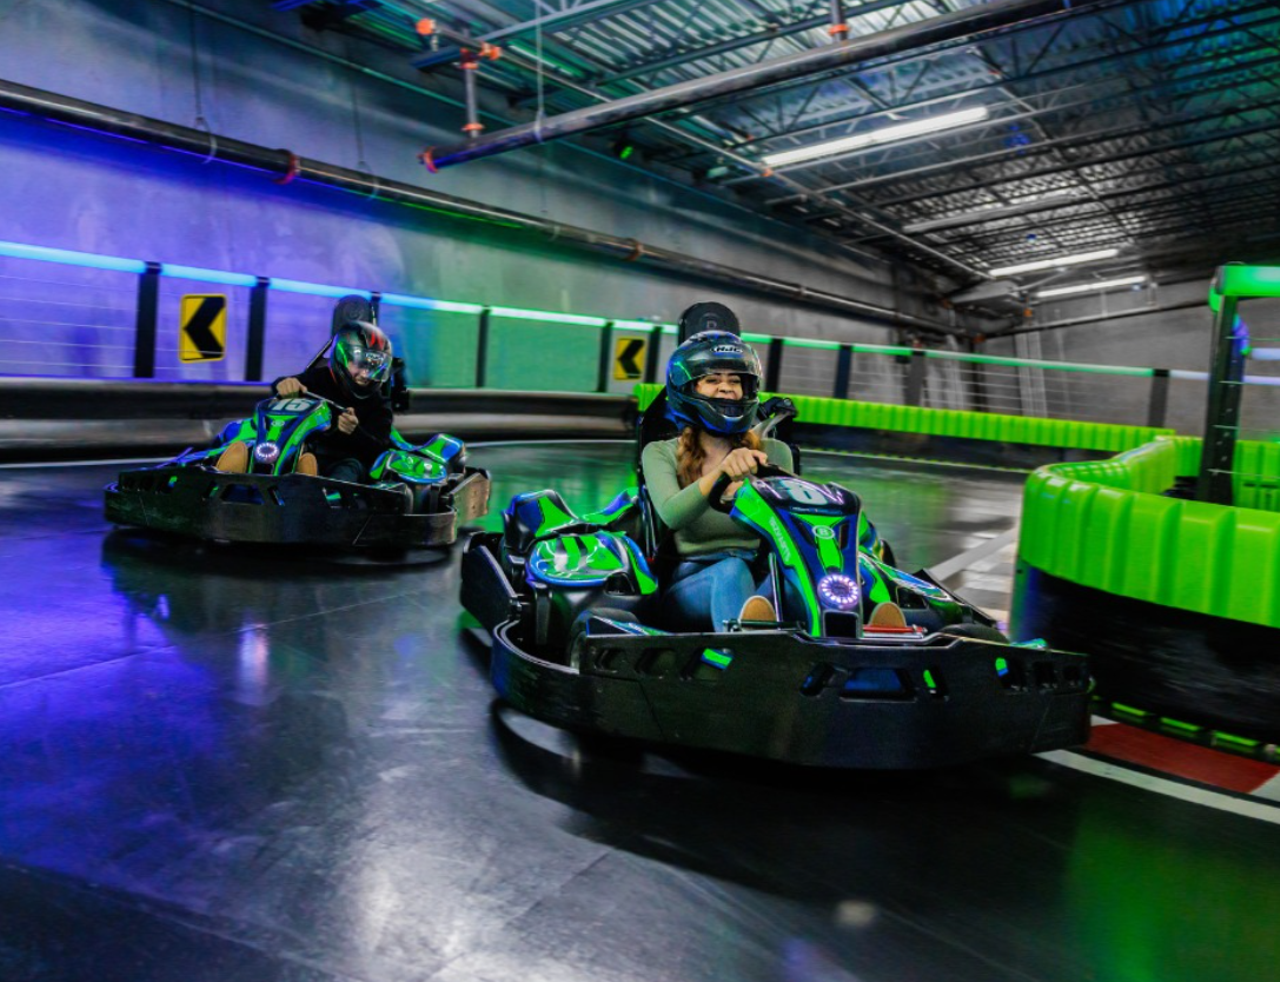 Go racing at Andretti Indoor Karting & Games
9299 Universal Blvd., Orlando
There’s no way you could get bored here. Andretti hosts a crazy long indoor go-kart track, plus there’s rush-hour bowling. They have beer and cocktails, too? We’re in.